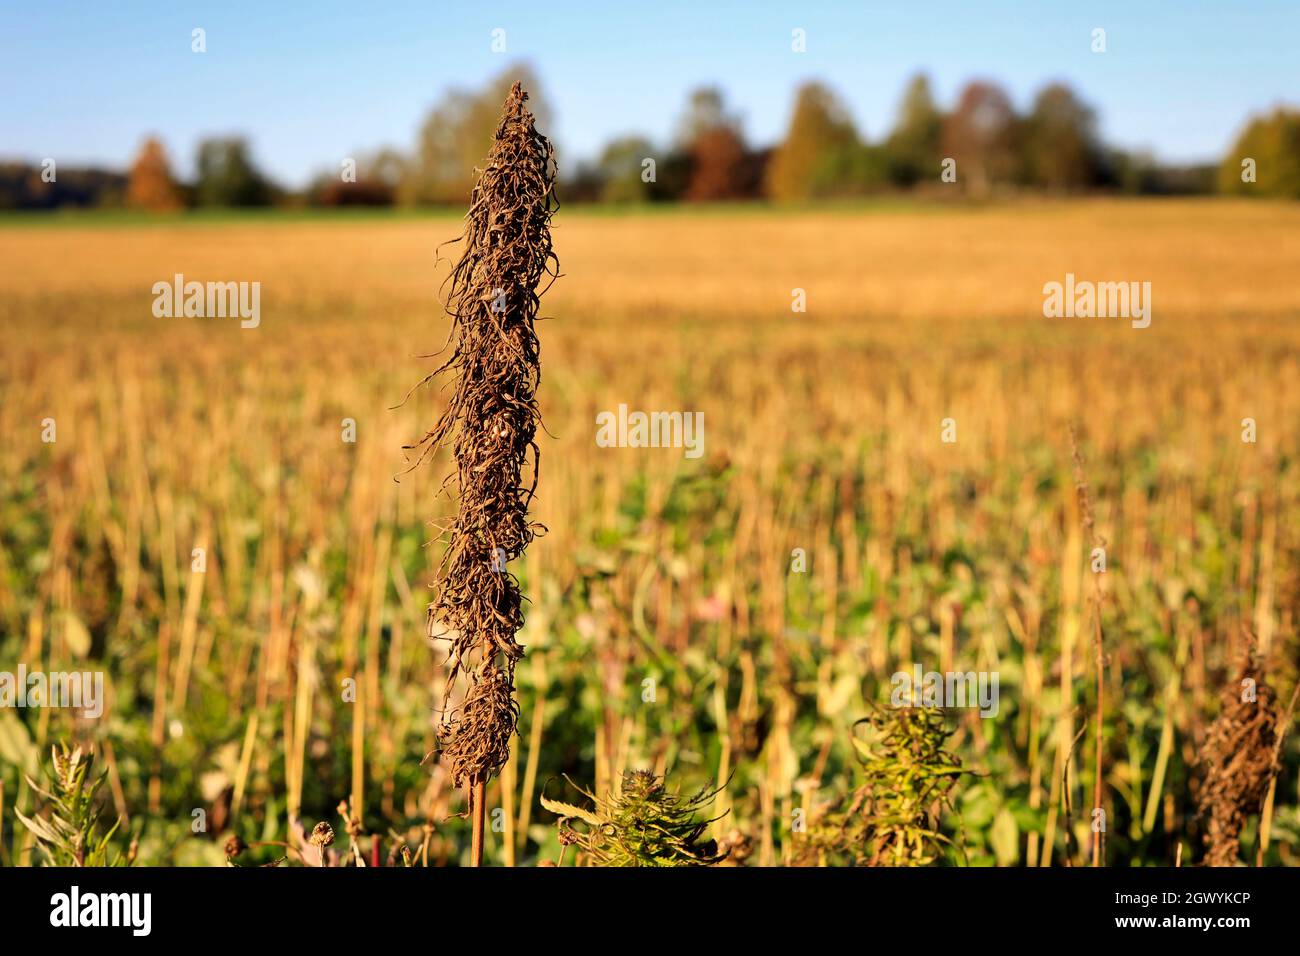 Low THC industrial hemp, Cannabis sativa, plant with harvested hemp field on the background. In Finland hemp is harvested in September-October. Stock Photo